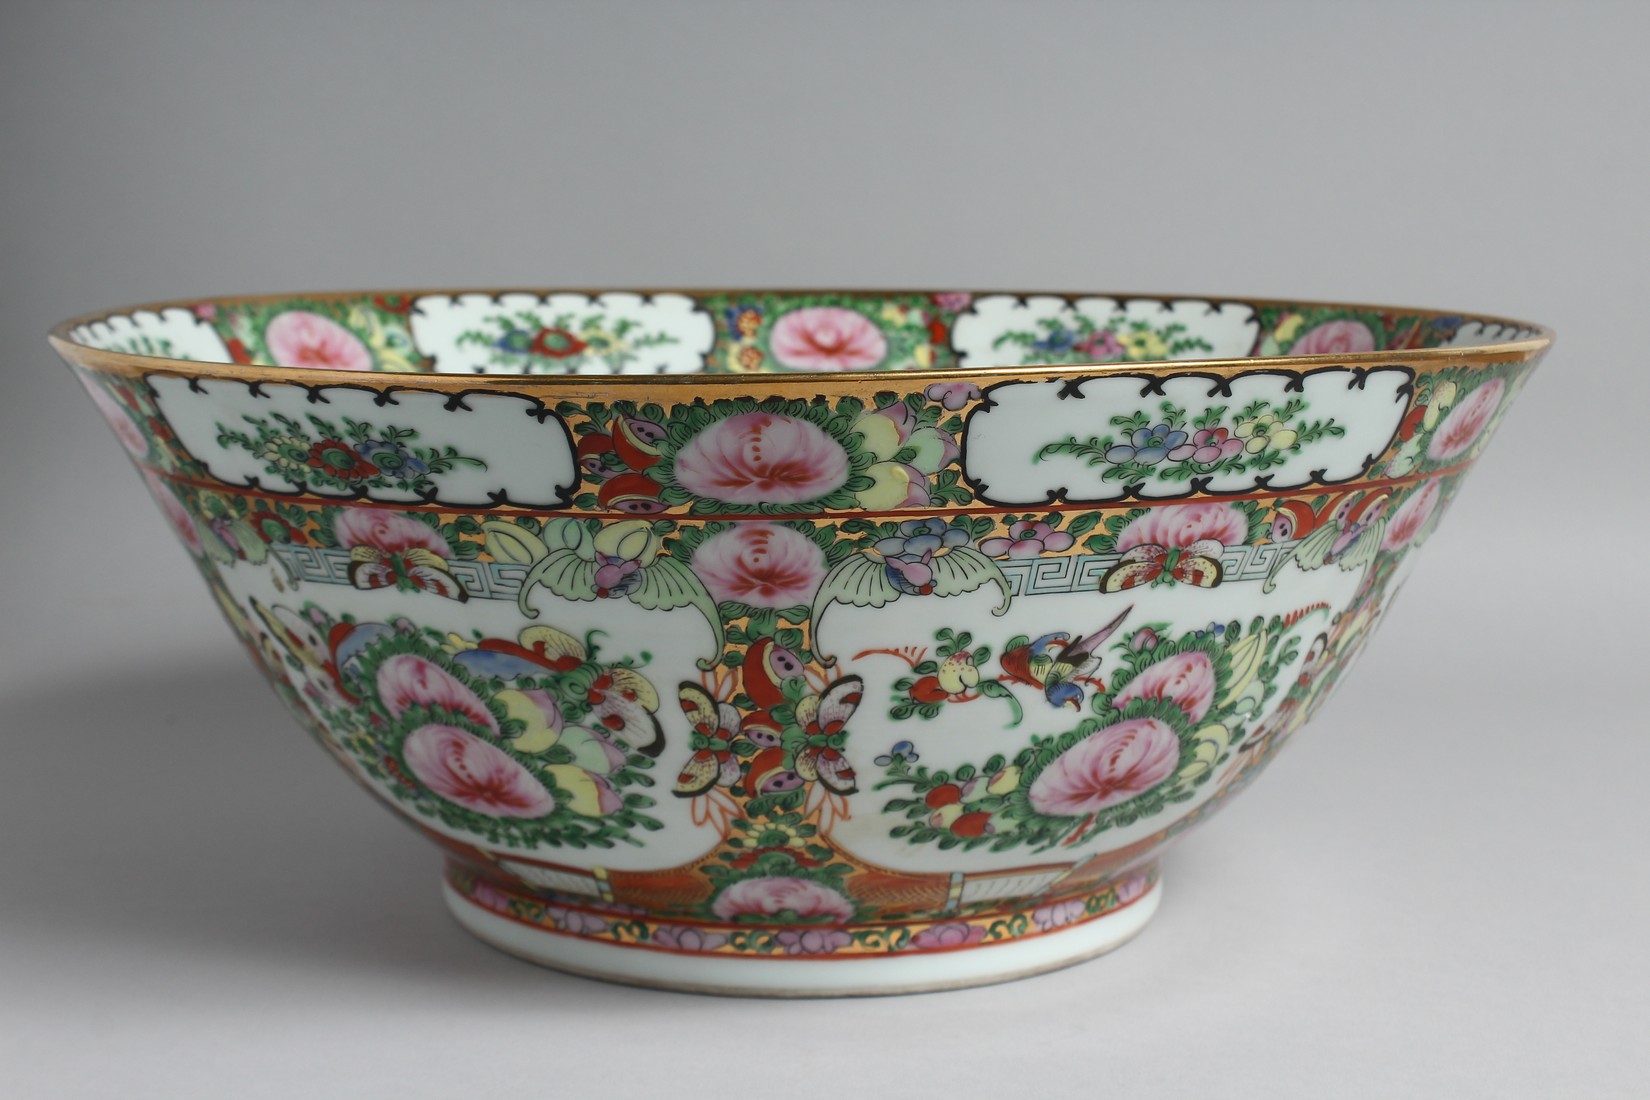 A LARGE CHINESE CANTON PORCELAIN PUNCH BOWL, painted with multiple panels of floral motifs and - Image 4 of 6